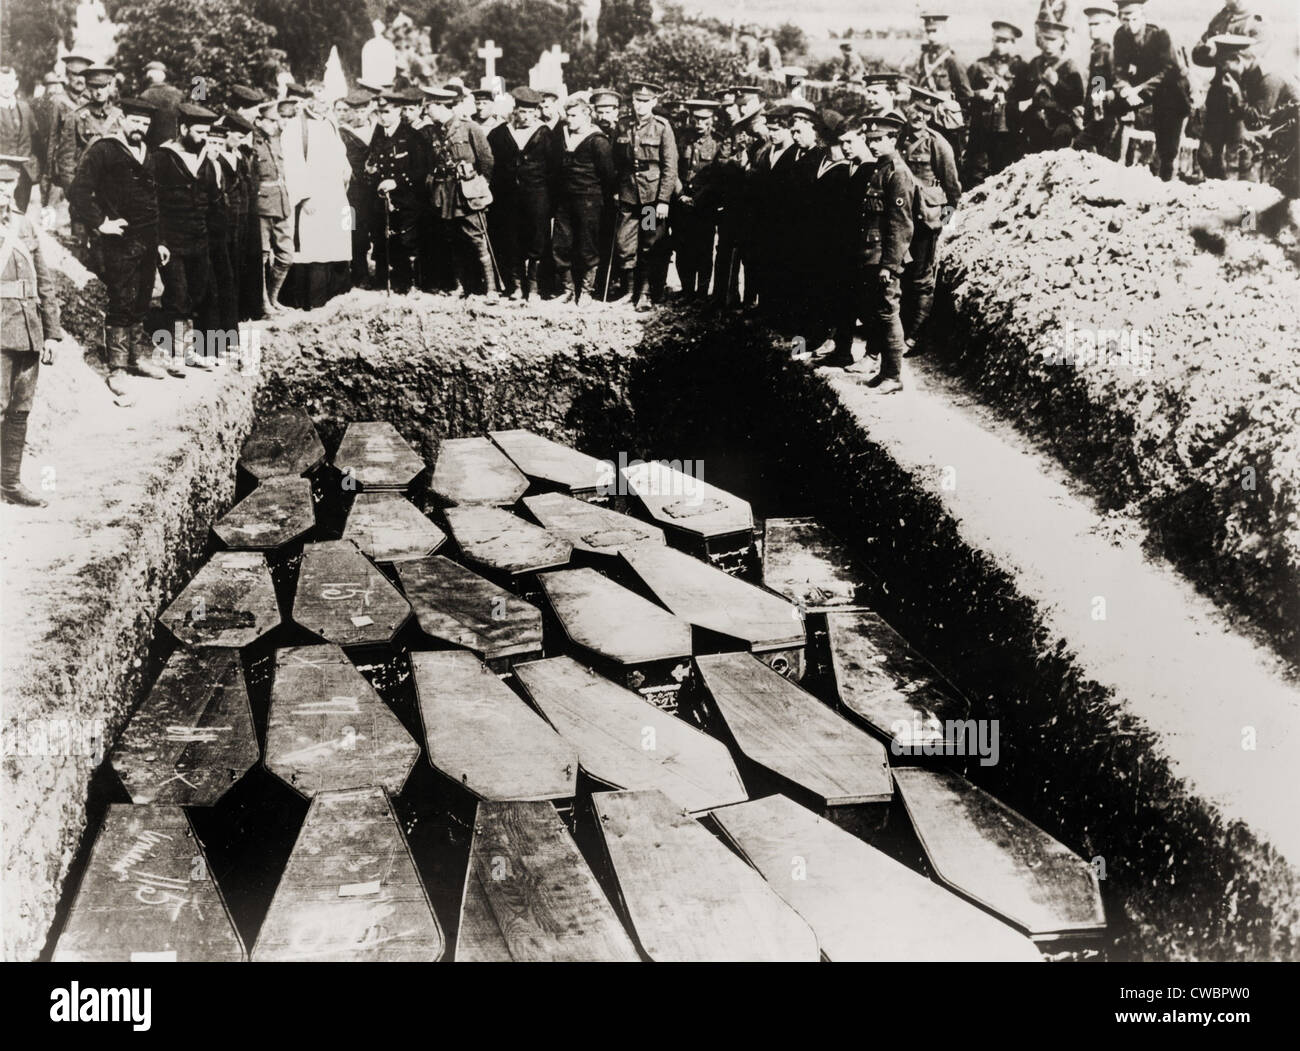 Clergy and military witness the common grave burial of Lusitania victims, in Ireland, after their recovery from sea. 1915. Stock Photo